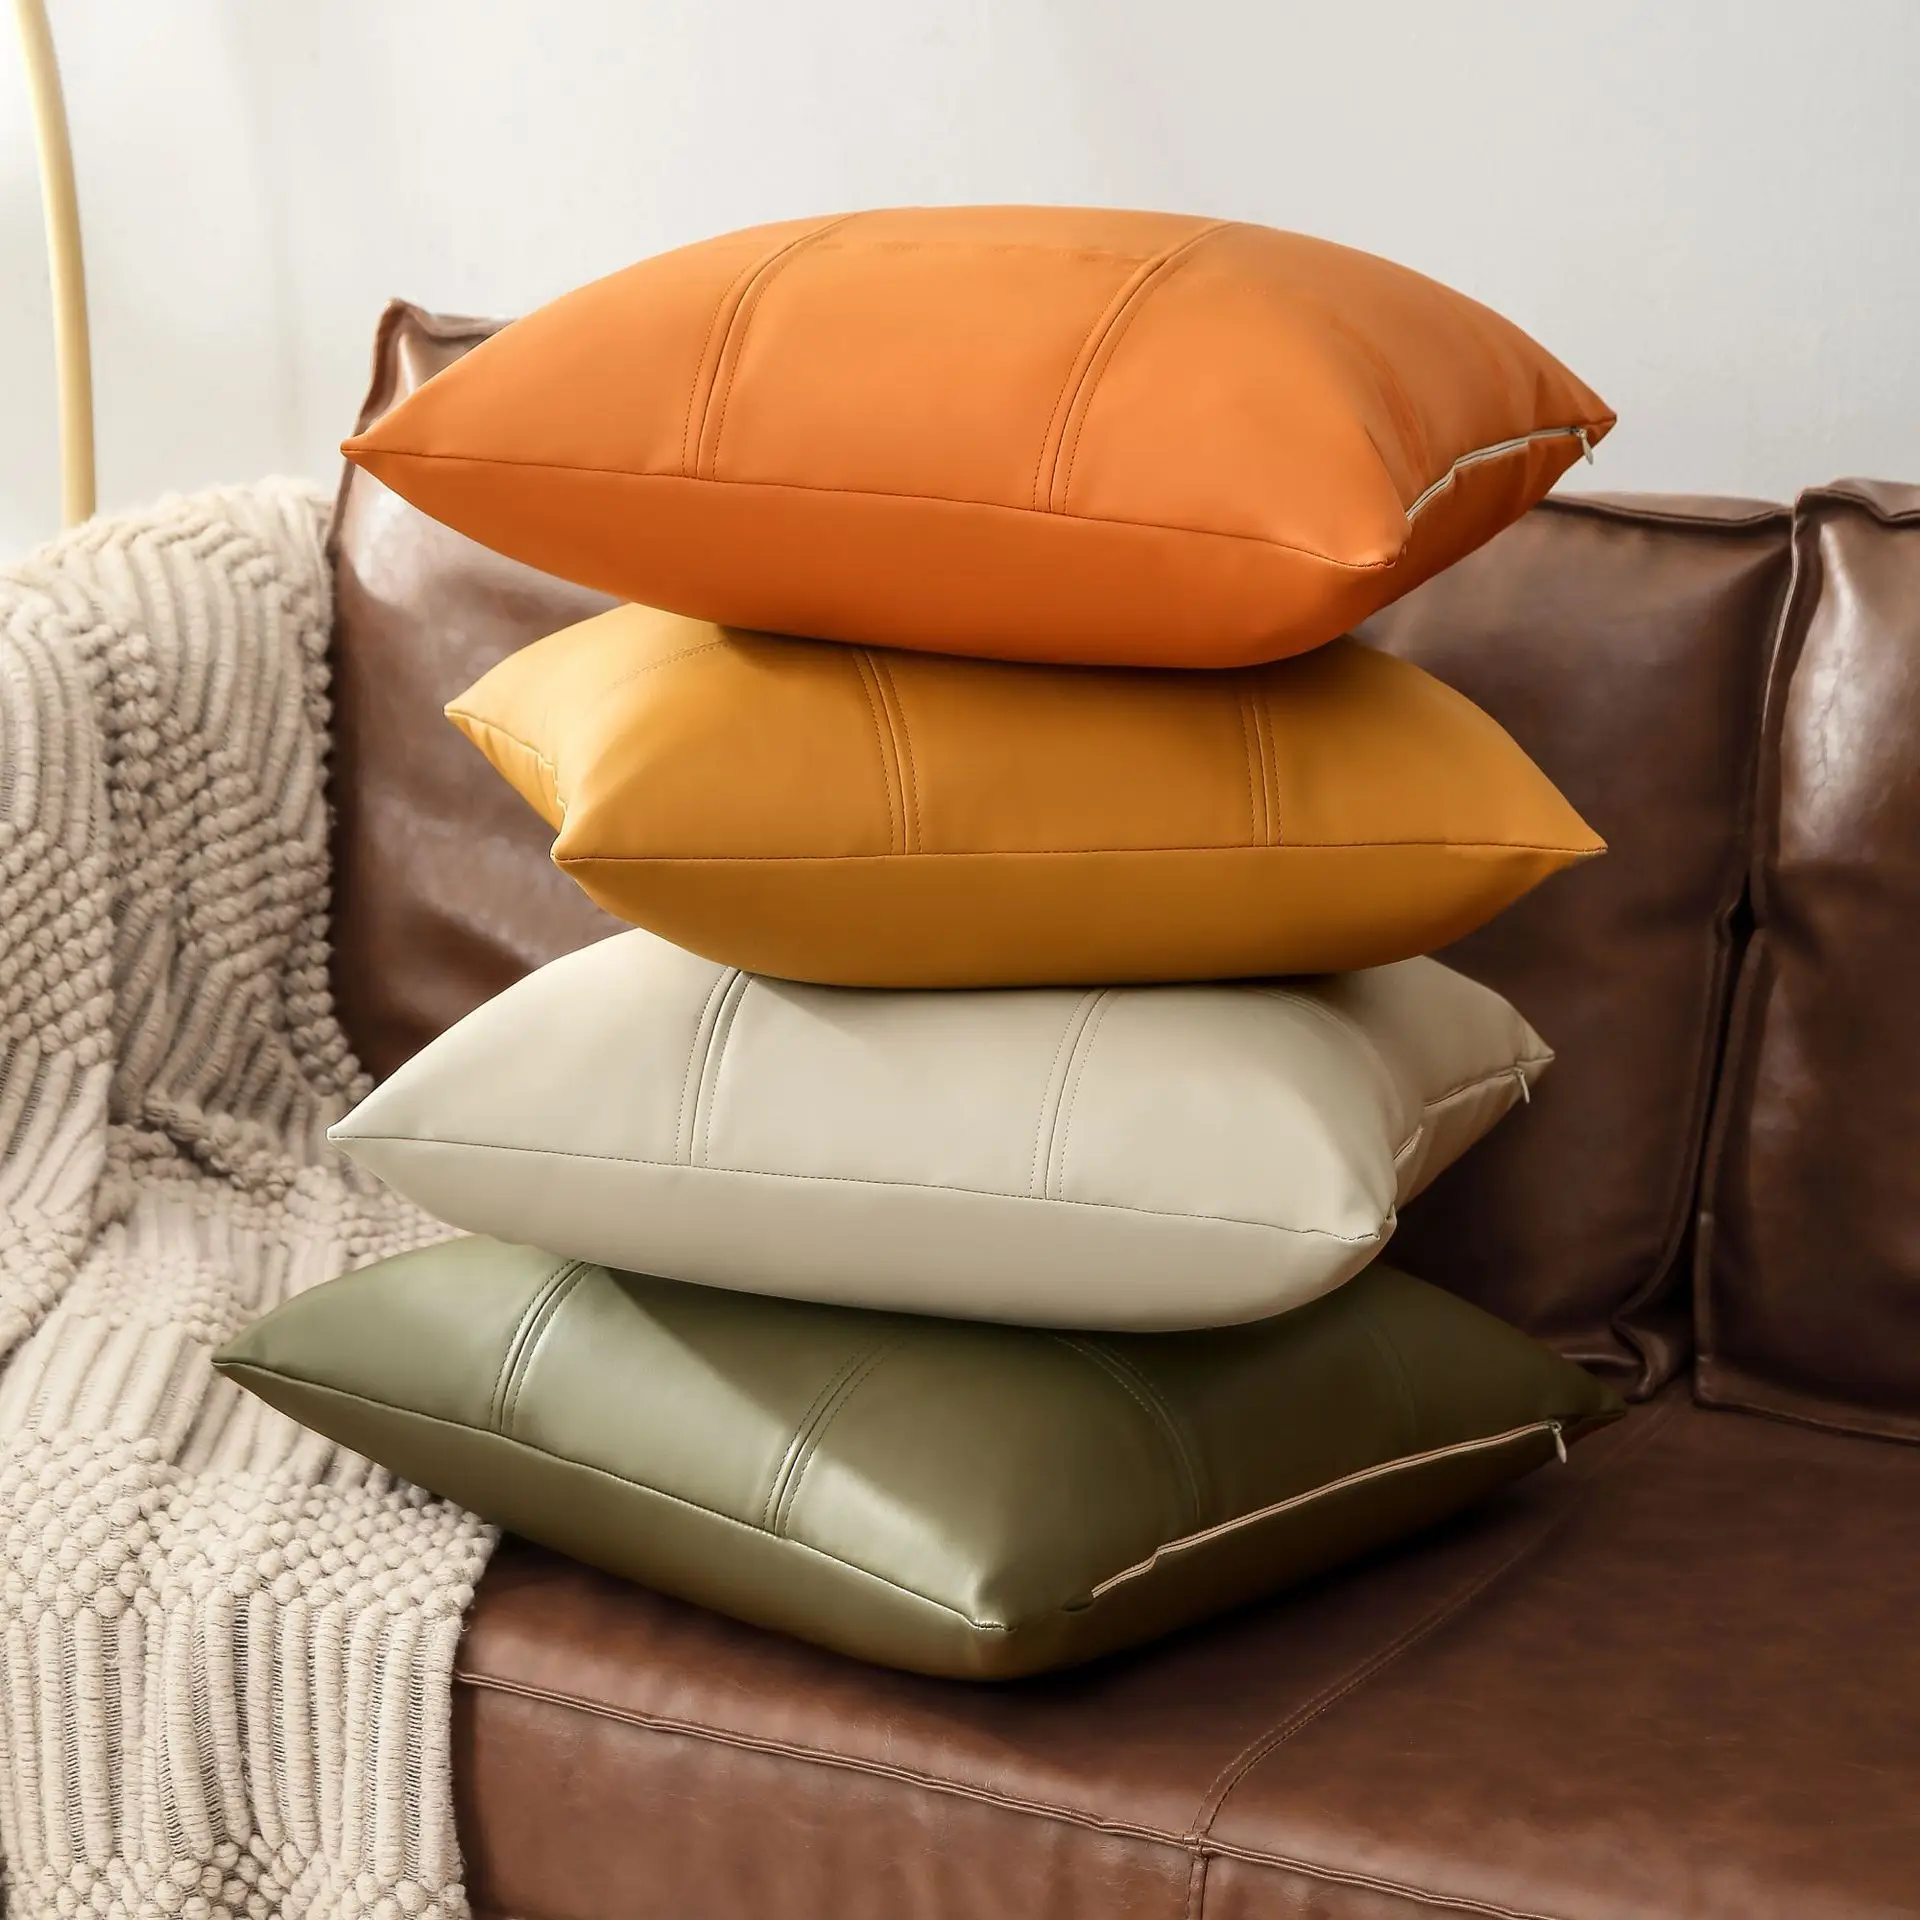 45*45cm Modern solid color spliced throw pillows leather vintage throw pillow sample room cushion